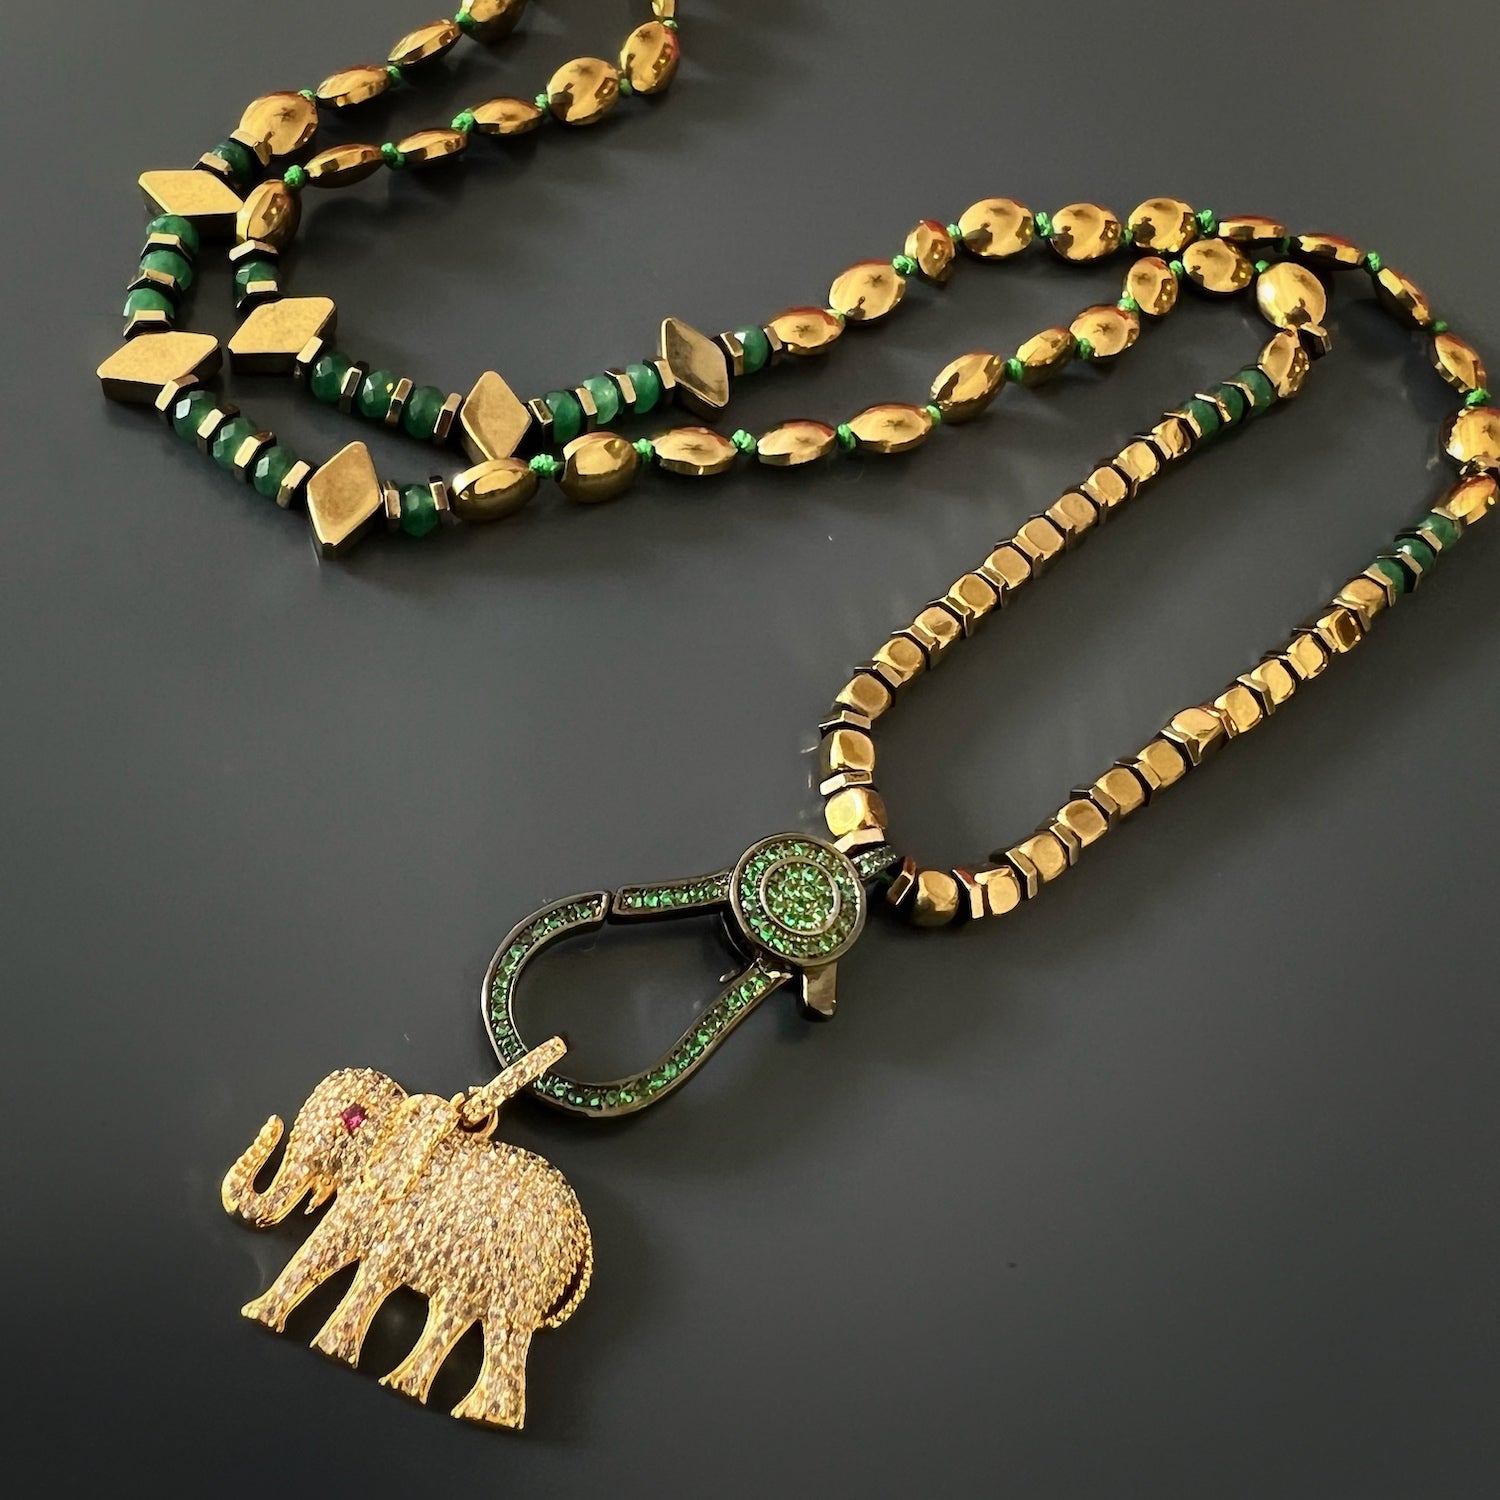 The diamond elephant golden necklace is a stunning piece of jewelry that is both elegant and unique. It's sure to make a statement and turn heads wherever you go.